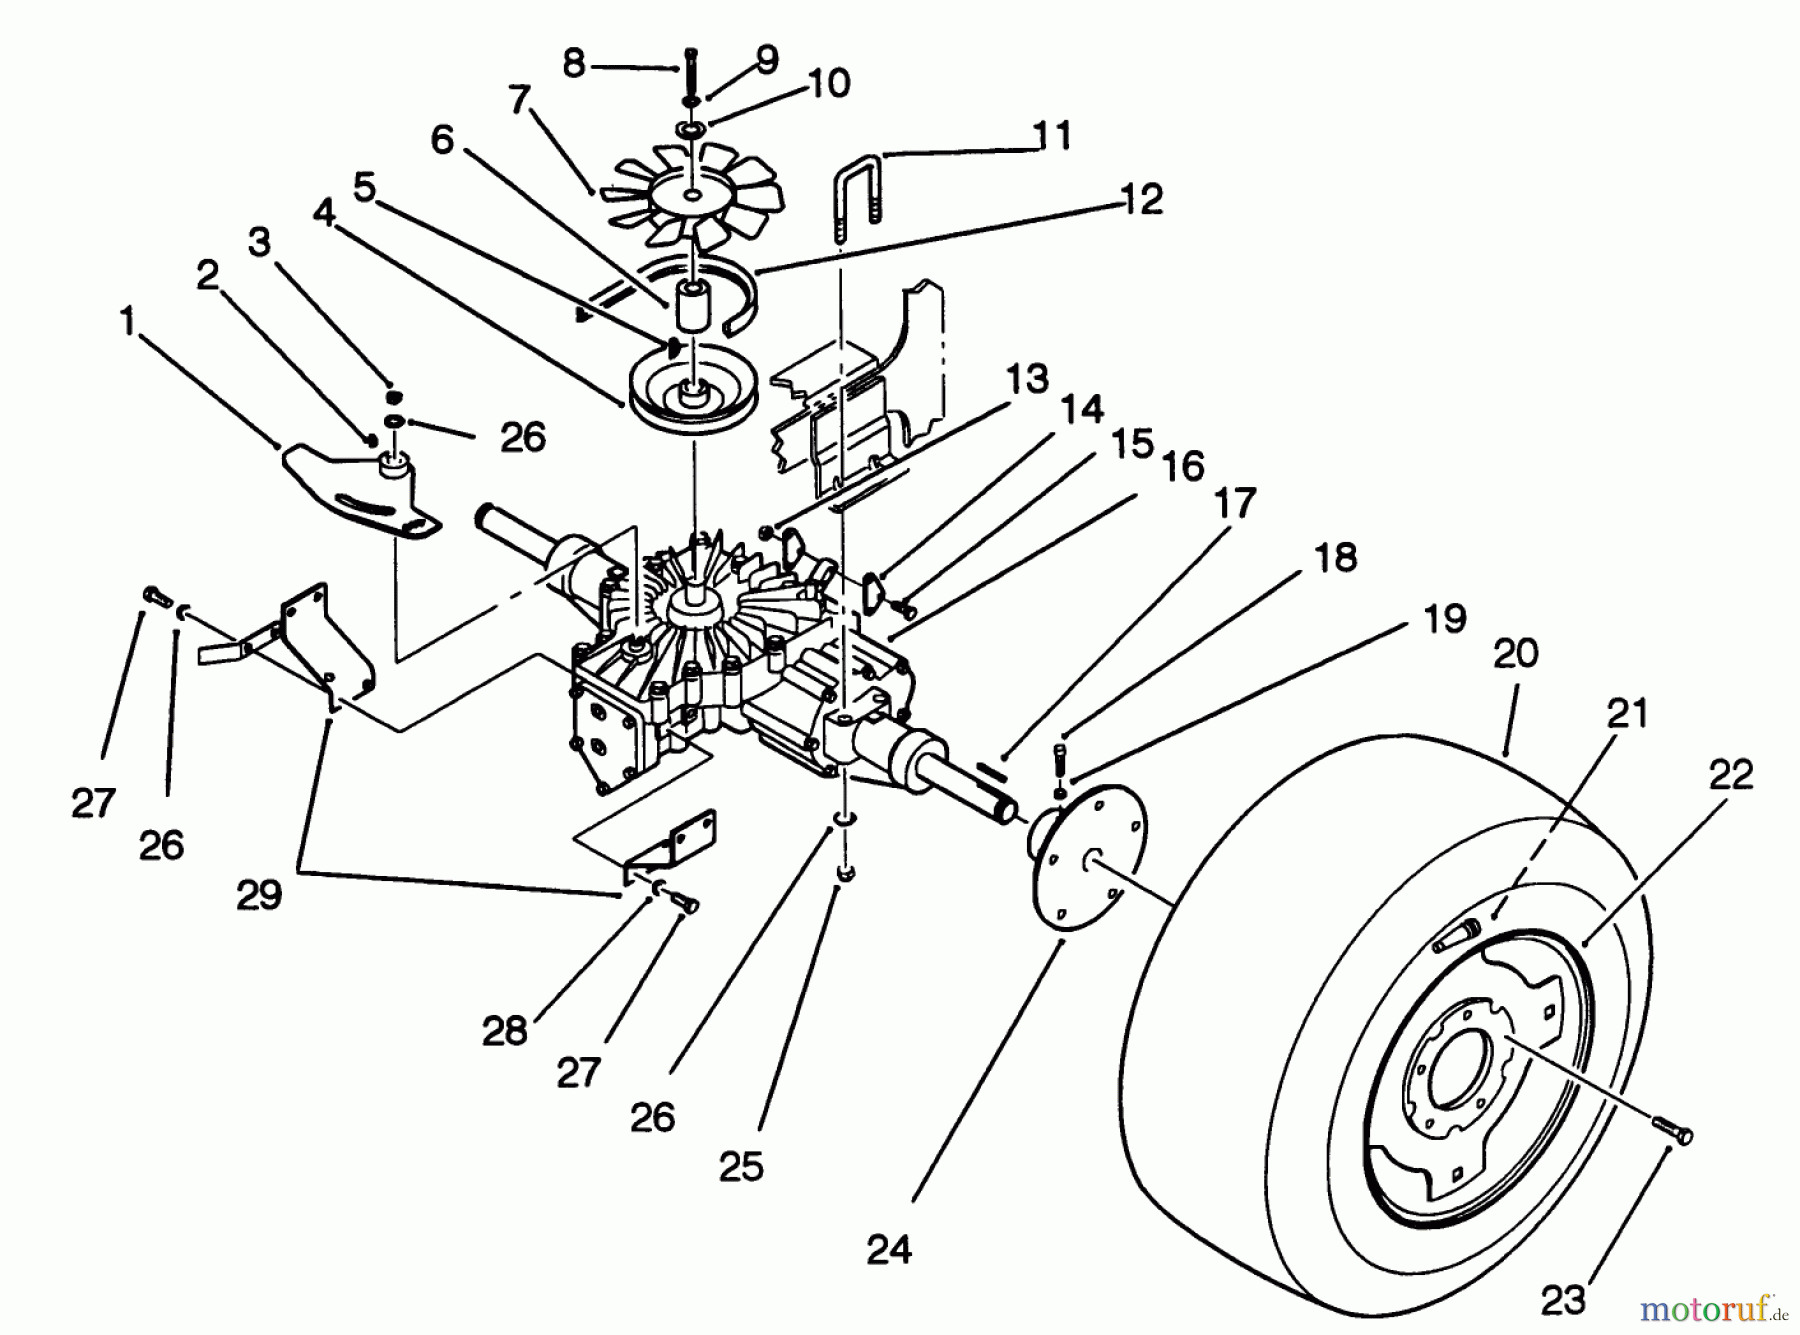  Toro Neu Mowers, Lawn & Garden Tractor Seite 1 42-16BE01 (246-H) - Toro 246-H Yard Tractor, 1992 (2000001-2999999) REAR WHEEL AND TRANSMISSION ASSEMBLY